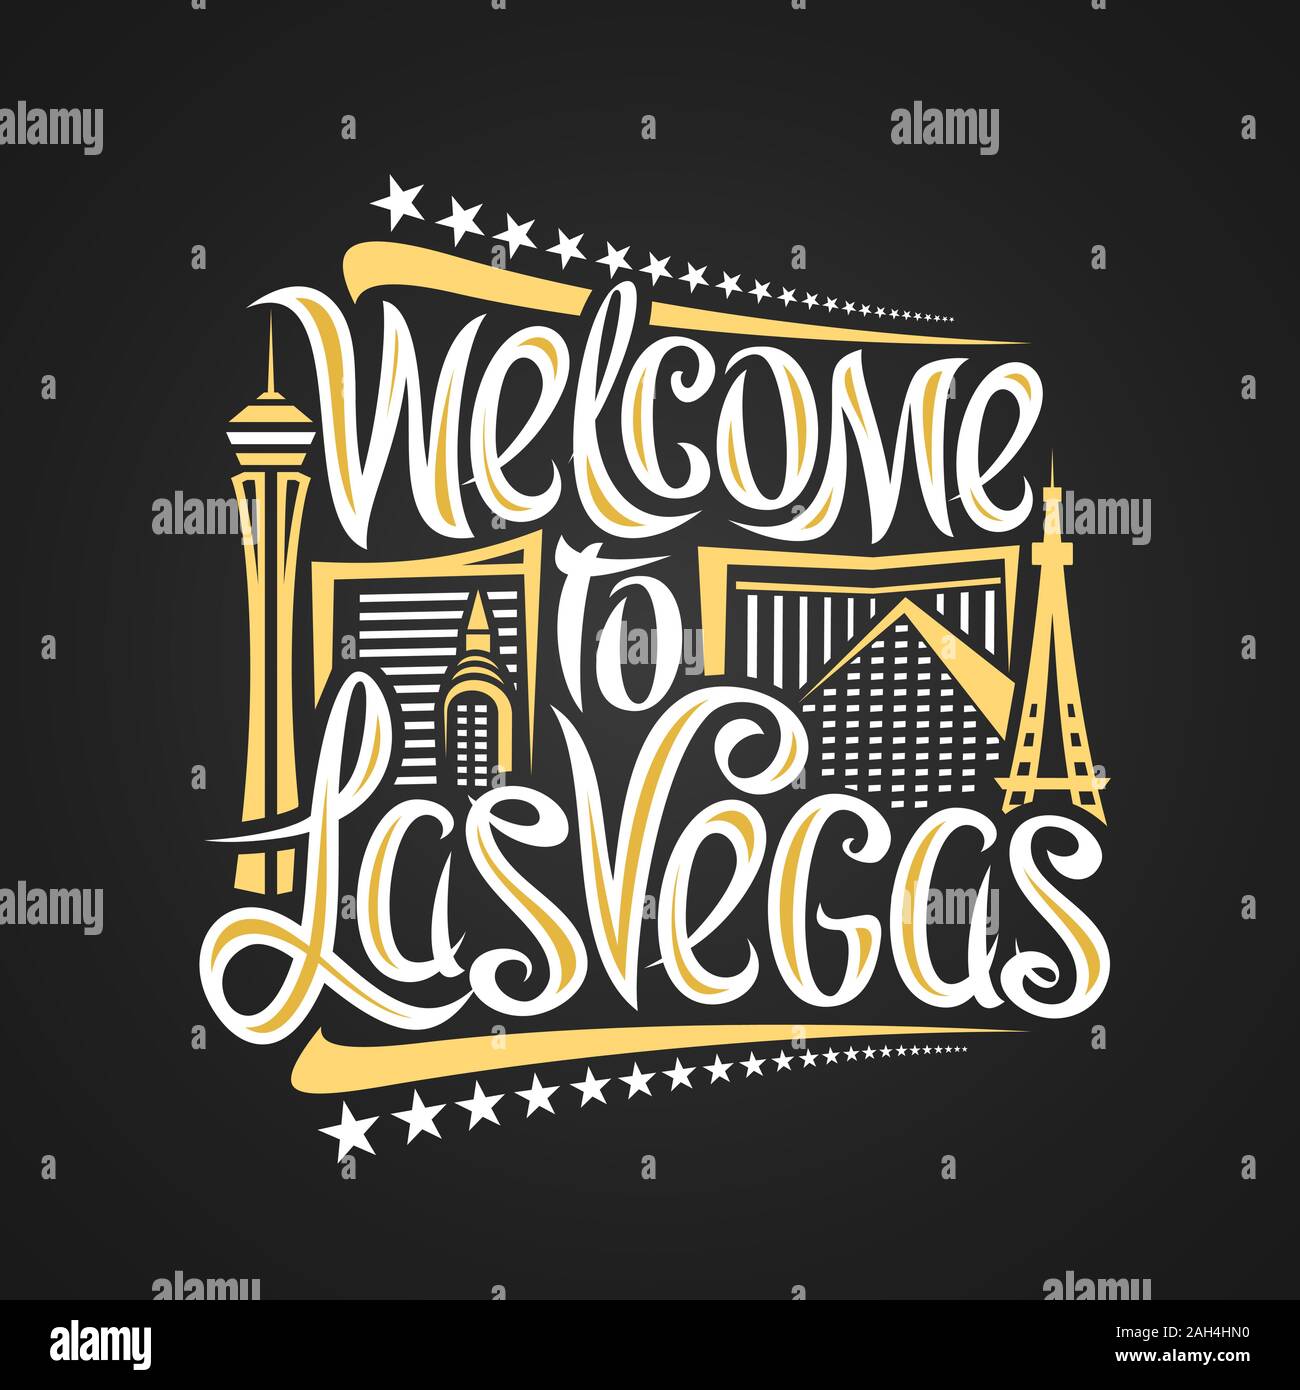 Vector poster for Las Vegas, decorative outline illustration with abstract architecture, creative lettering - welcome to las vegas and stars in a row, Stock Vector